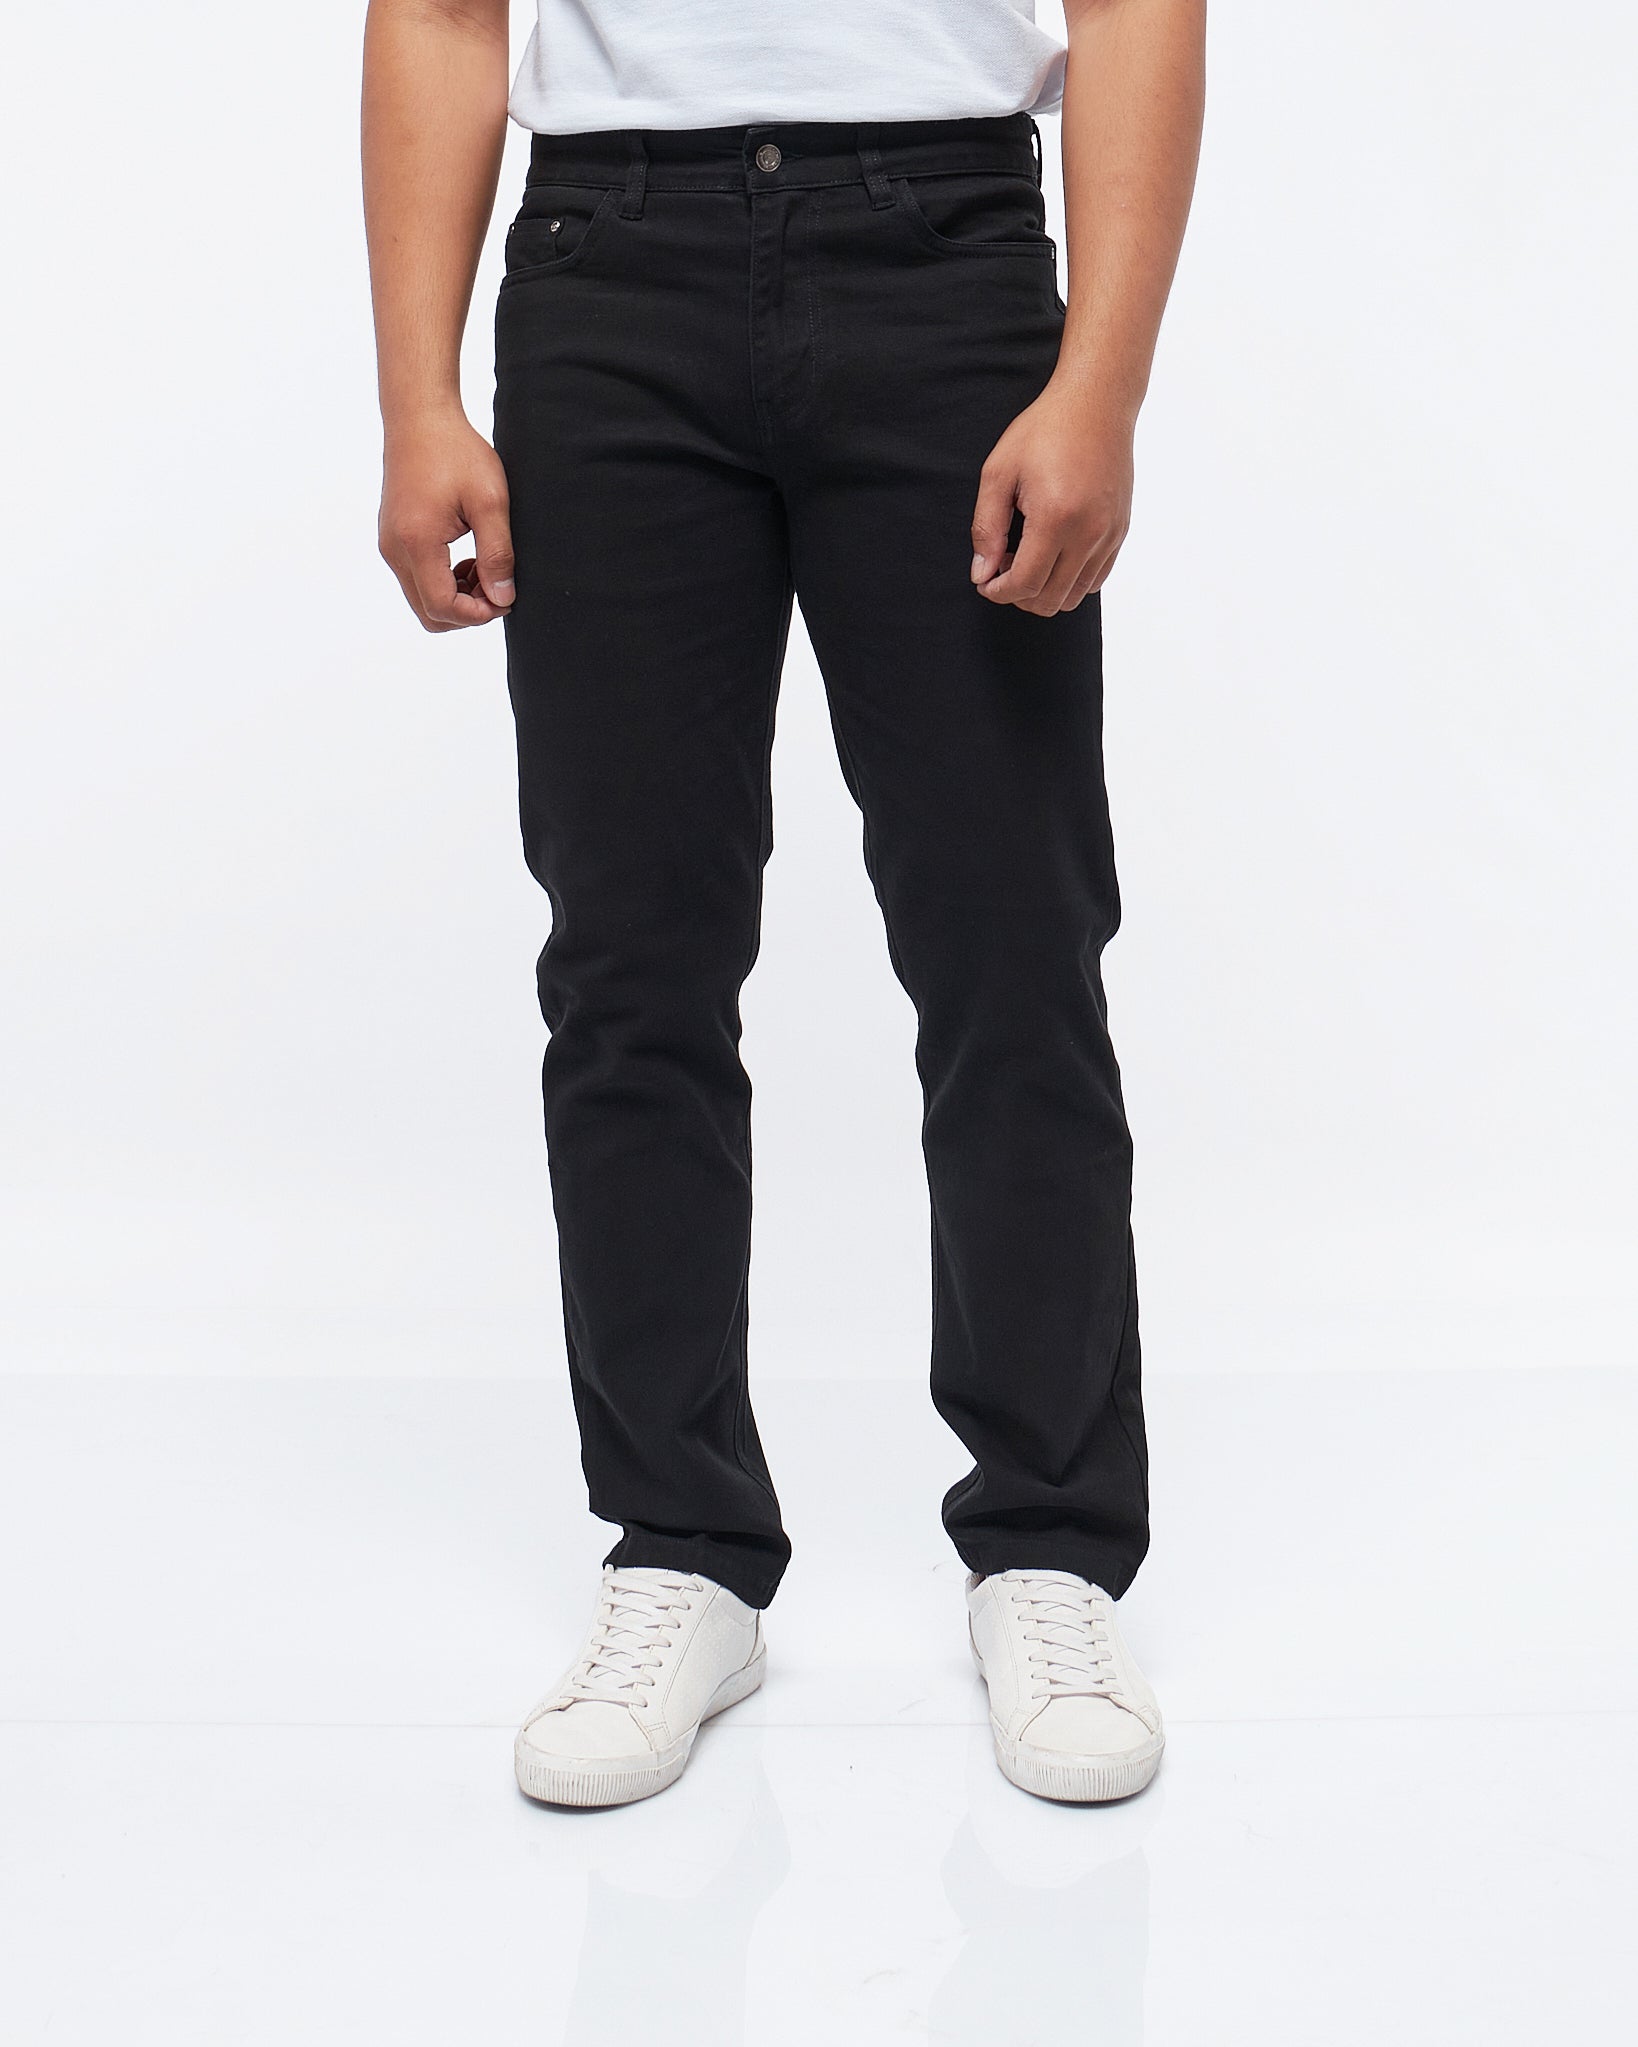 MOI OUTFIT-Soft Stretchy Men Jeans 24.90